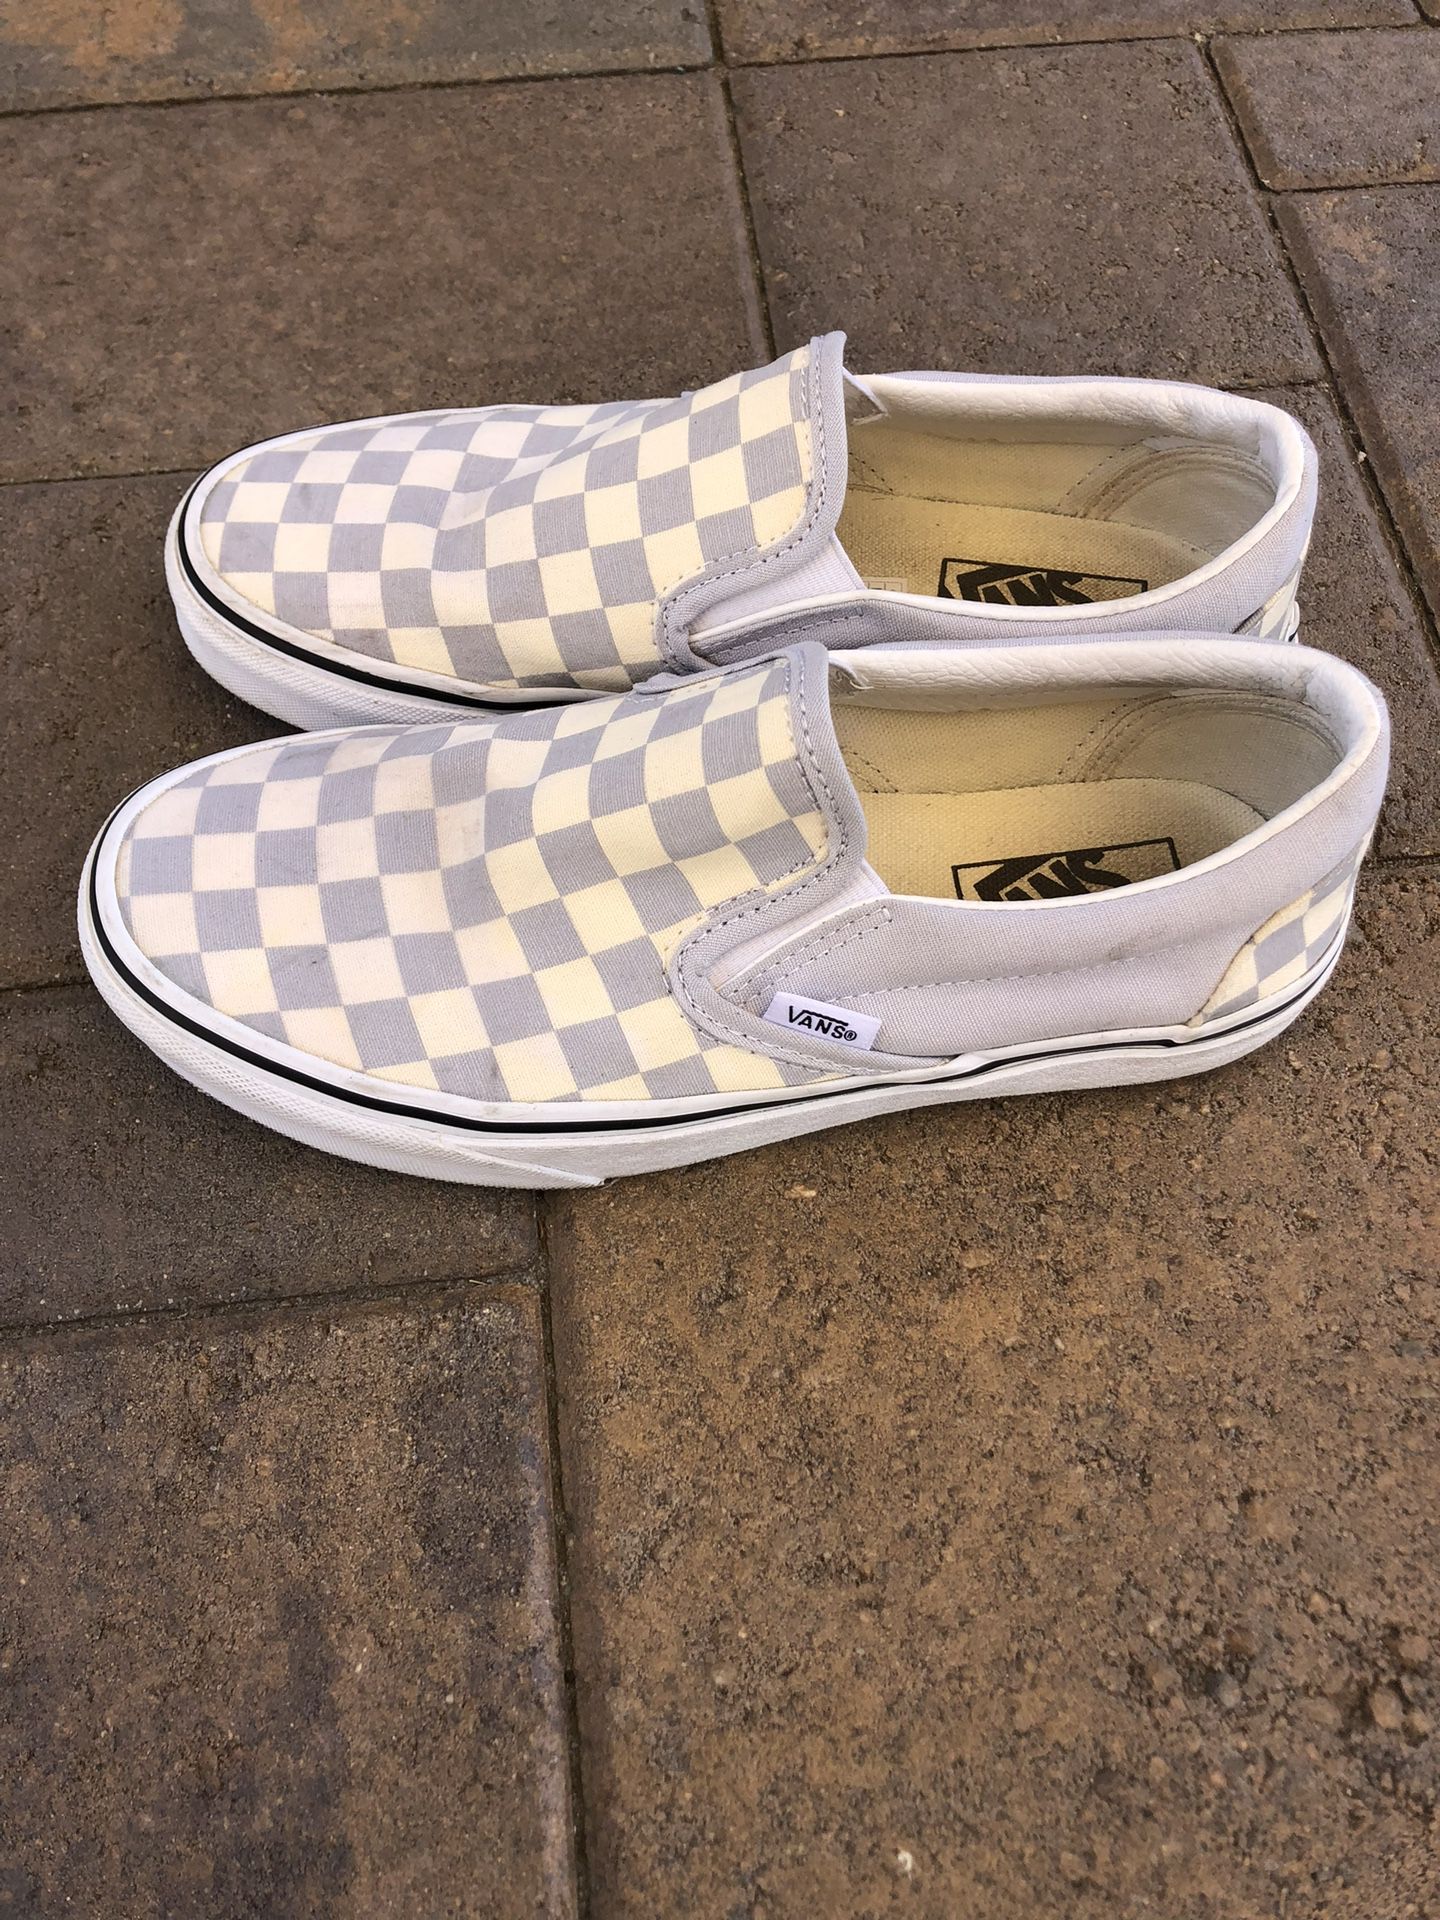 Vans Checkered  Shoes